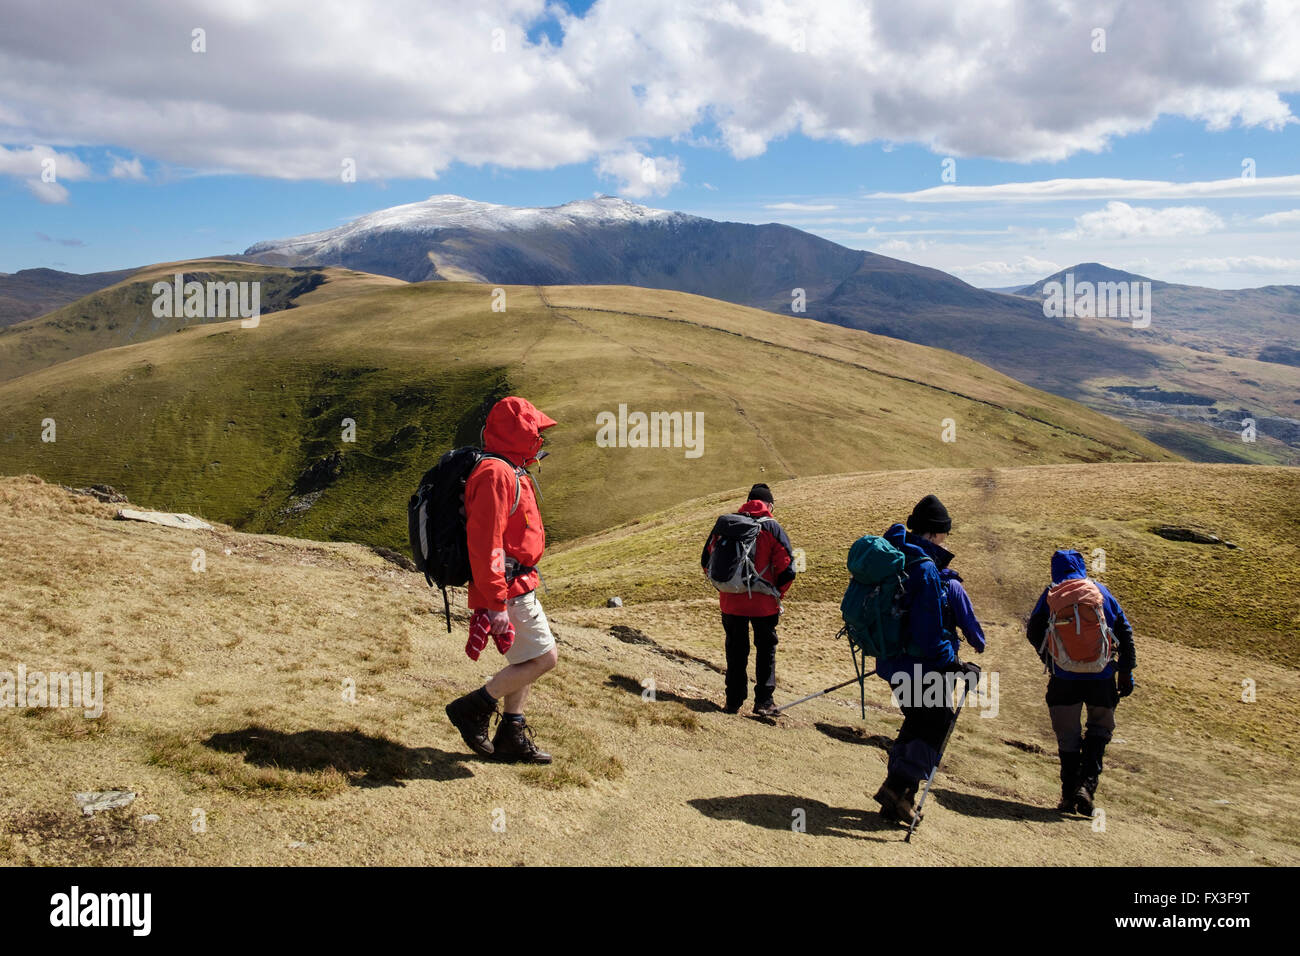 Hikers hiking down Foel Gron with distant view of snowcapped mount Snowdon in Snowdonia National Park (Eryri) mountains. North Wales UK Britain Stock Photo